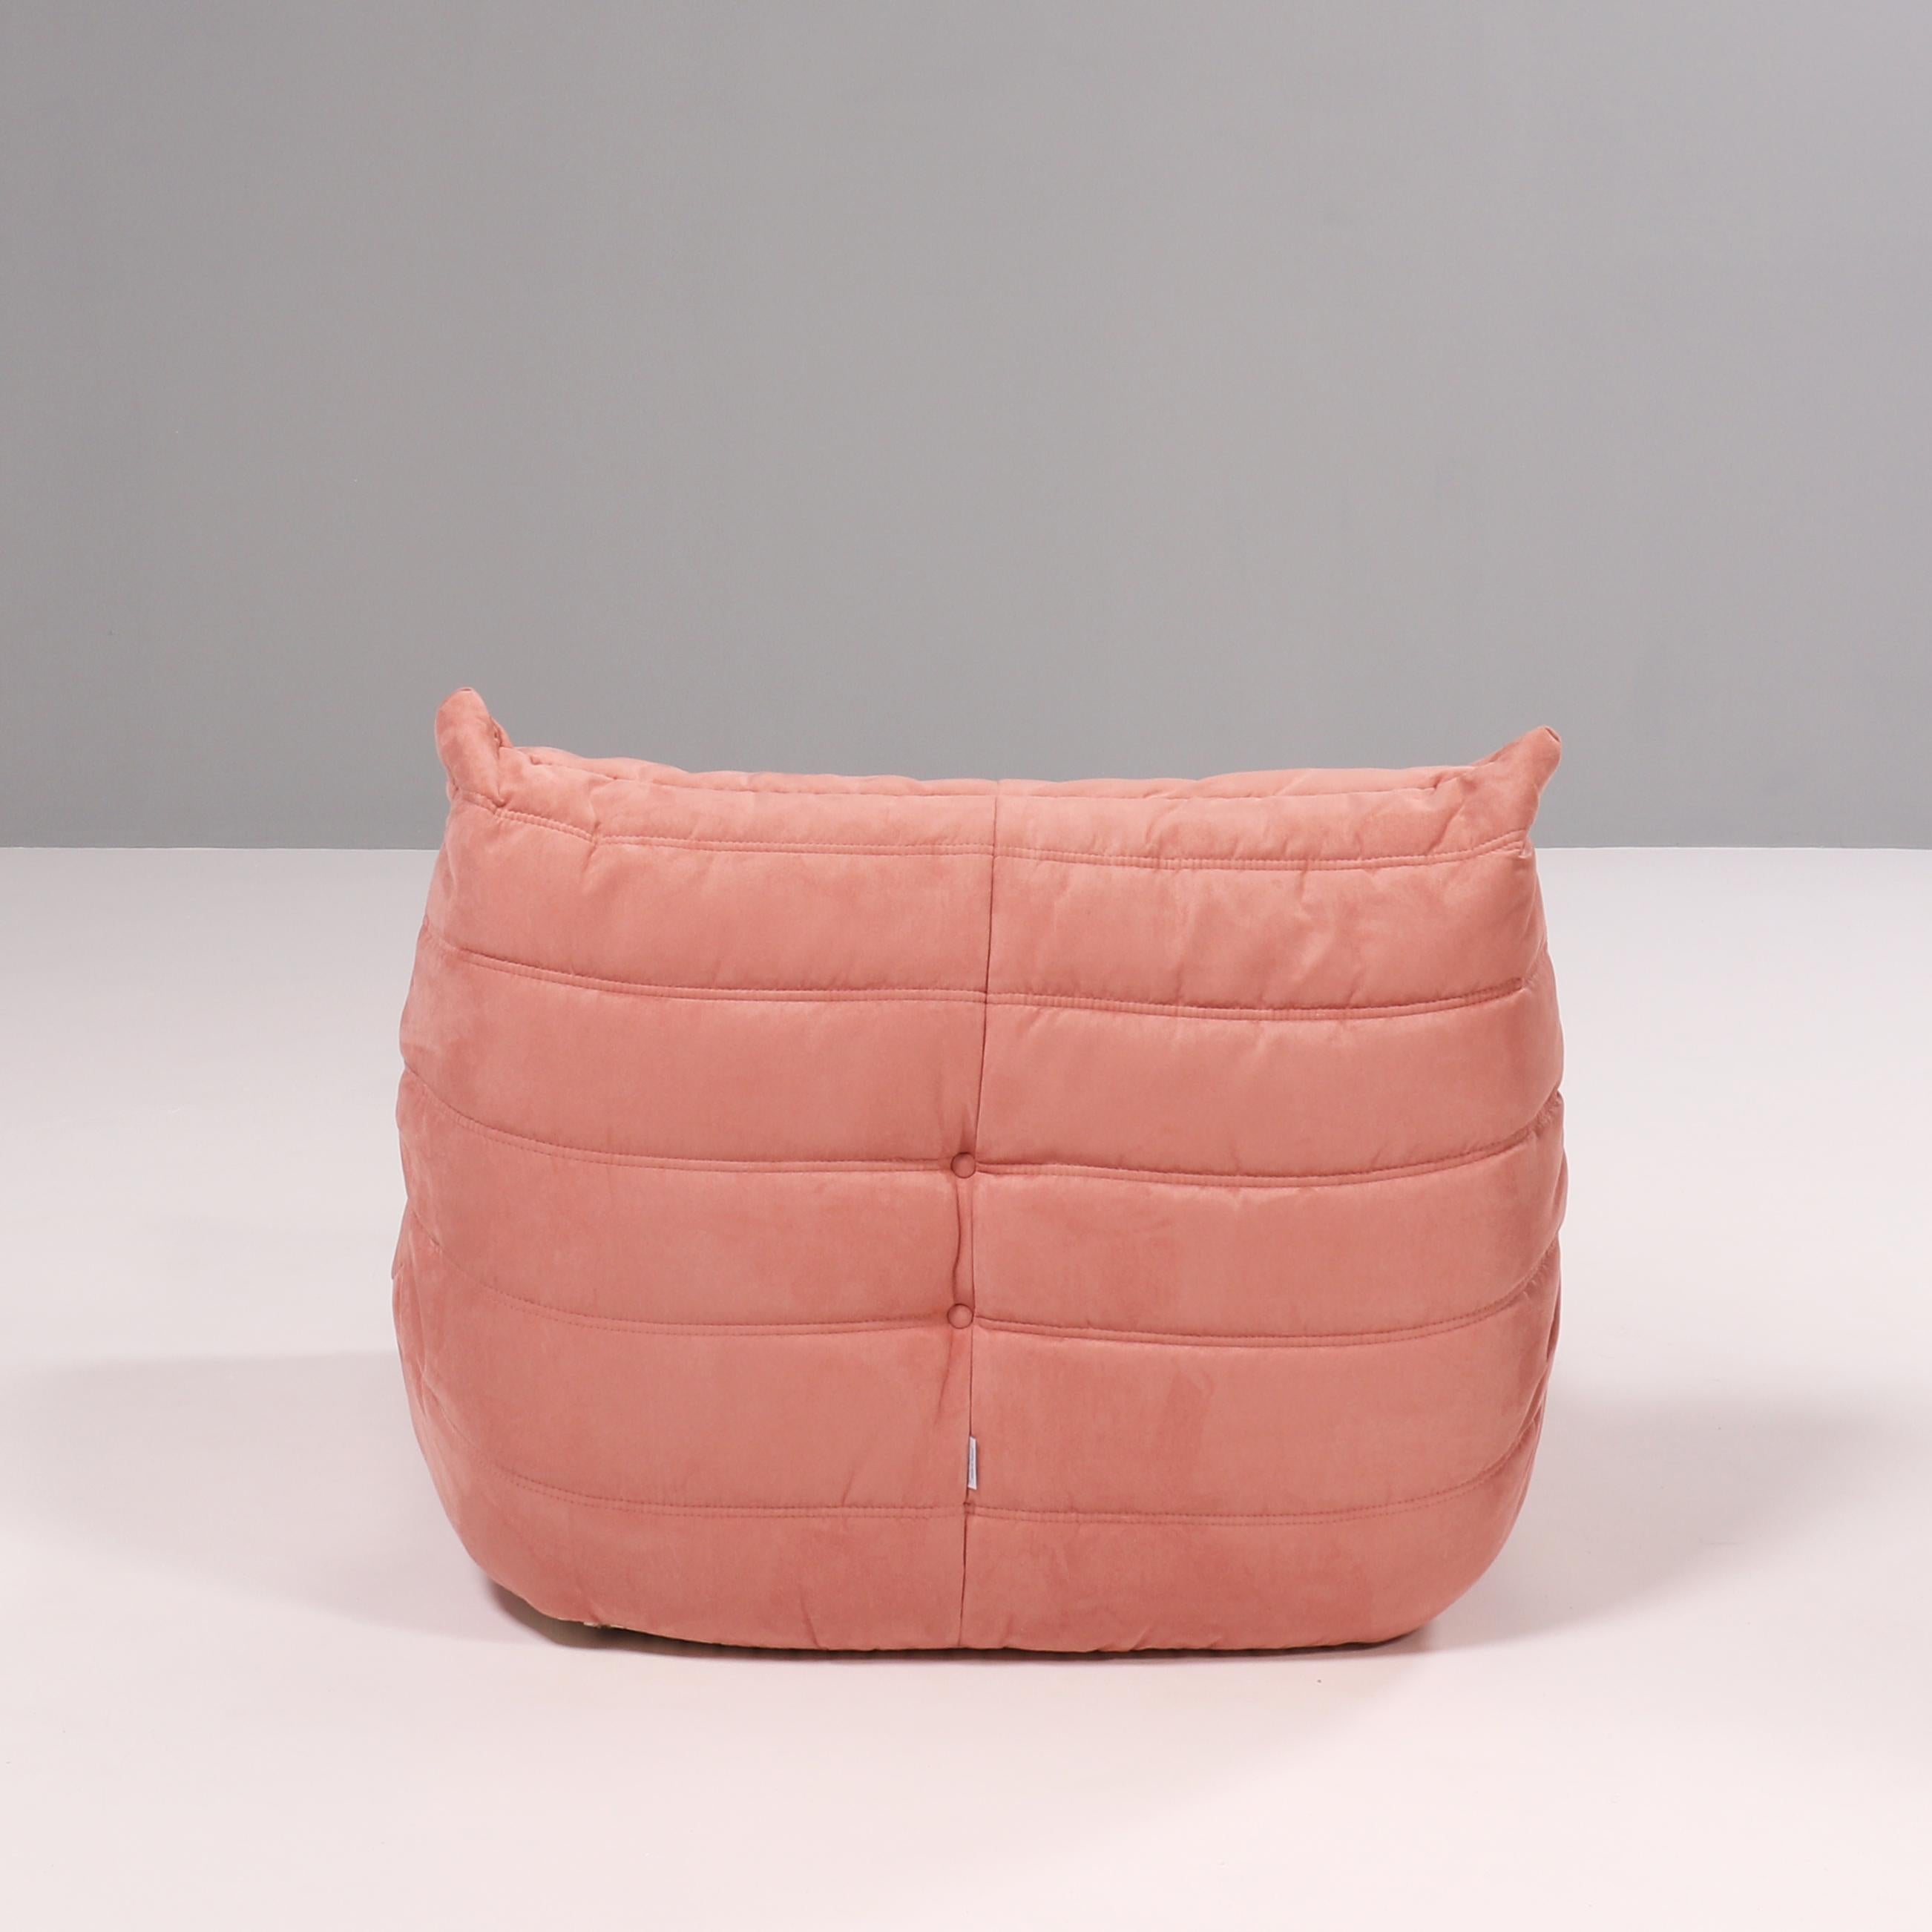 The iconic Togo pink sofa, originally designed by Michel Ducaroy for Ligne Roset in 1973, has become a design mid century classic.

This fireside armchair and footstool is incredibly versatile and can be used alone or paired with other pieces from